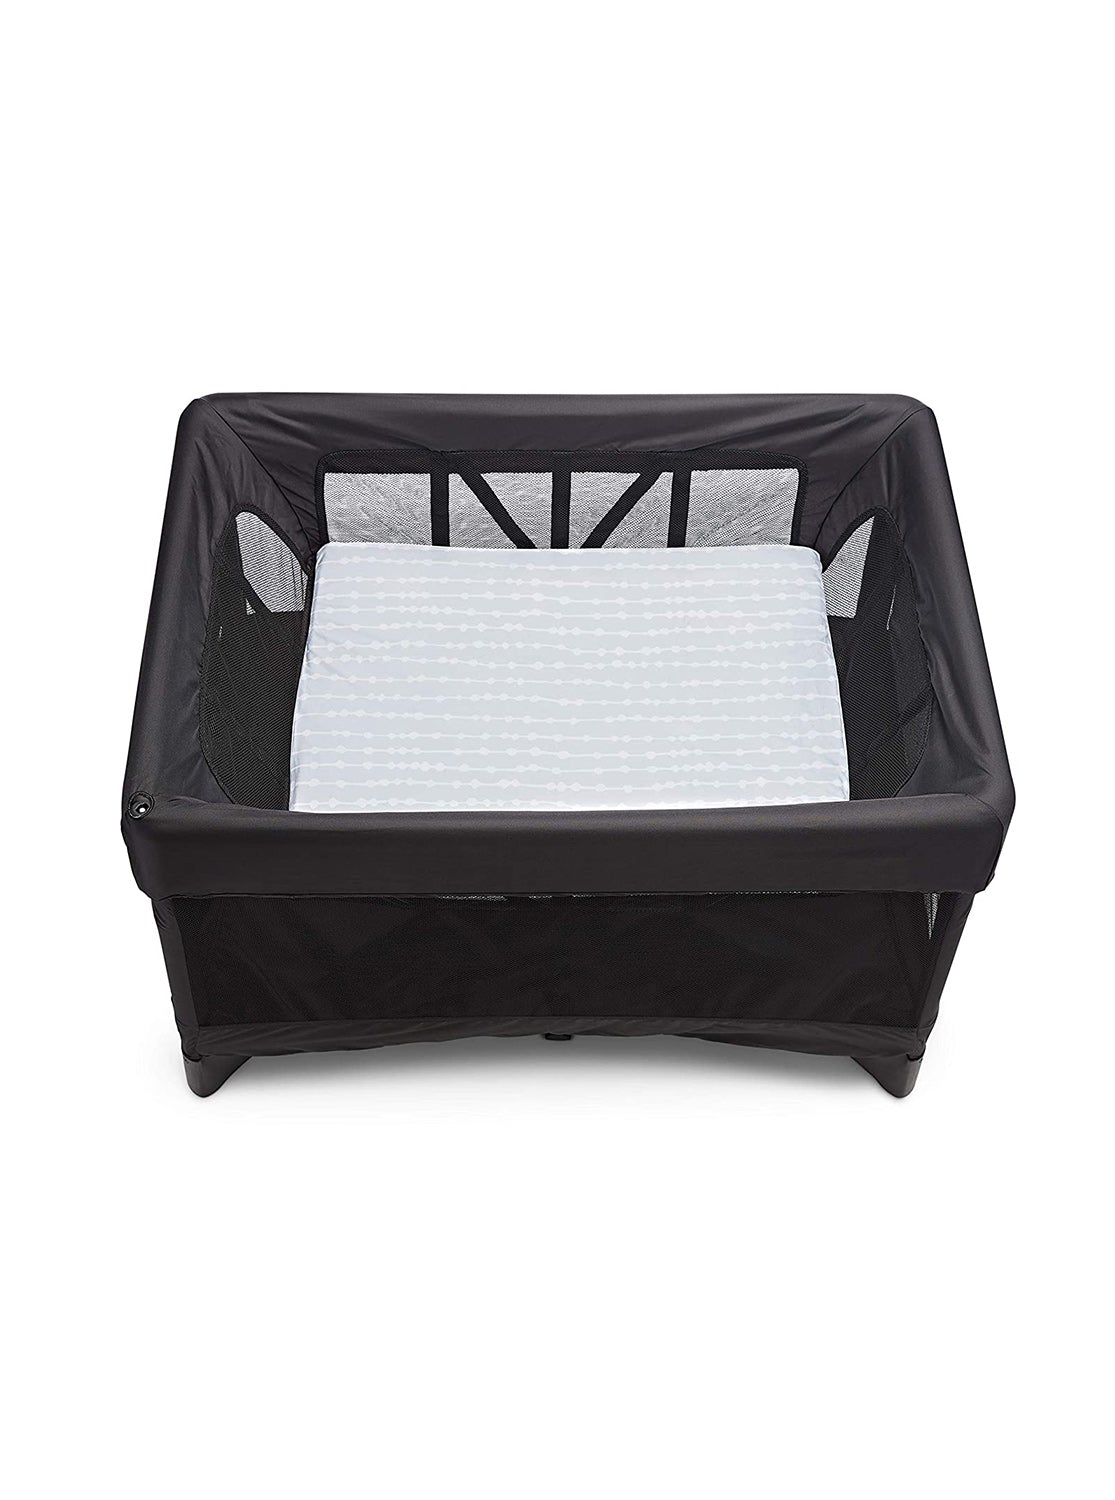 4moms Breeze Bassinet Sheets, for Baby Bassinets and Furniture, Waterproof Fabric, Grey Beads - ANB Baby -$20 - $50